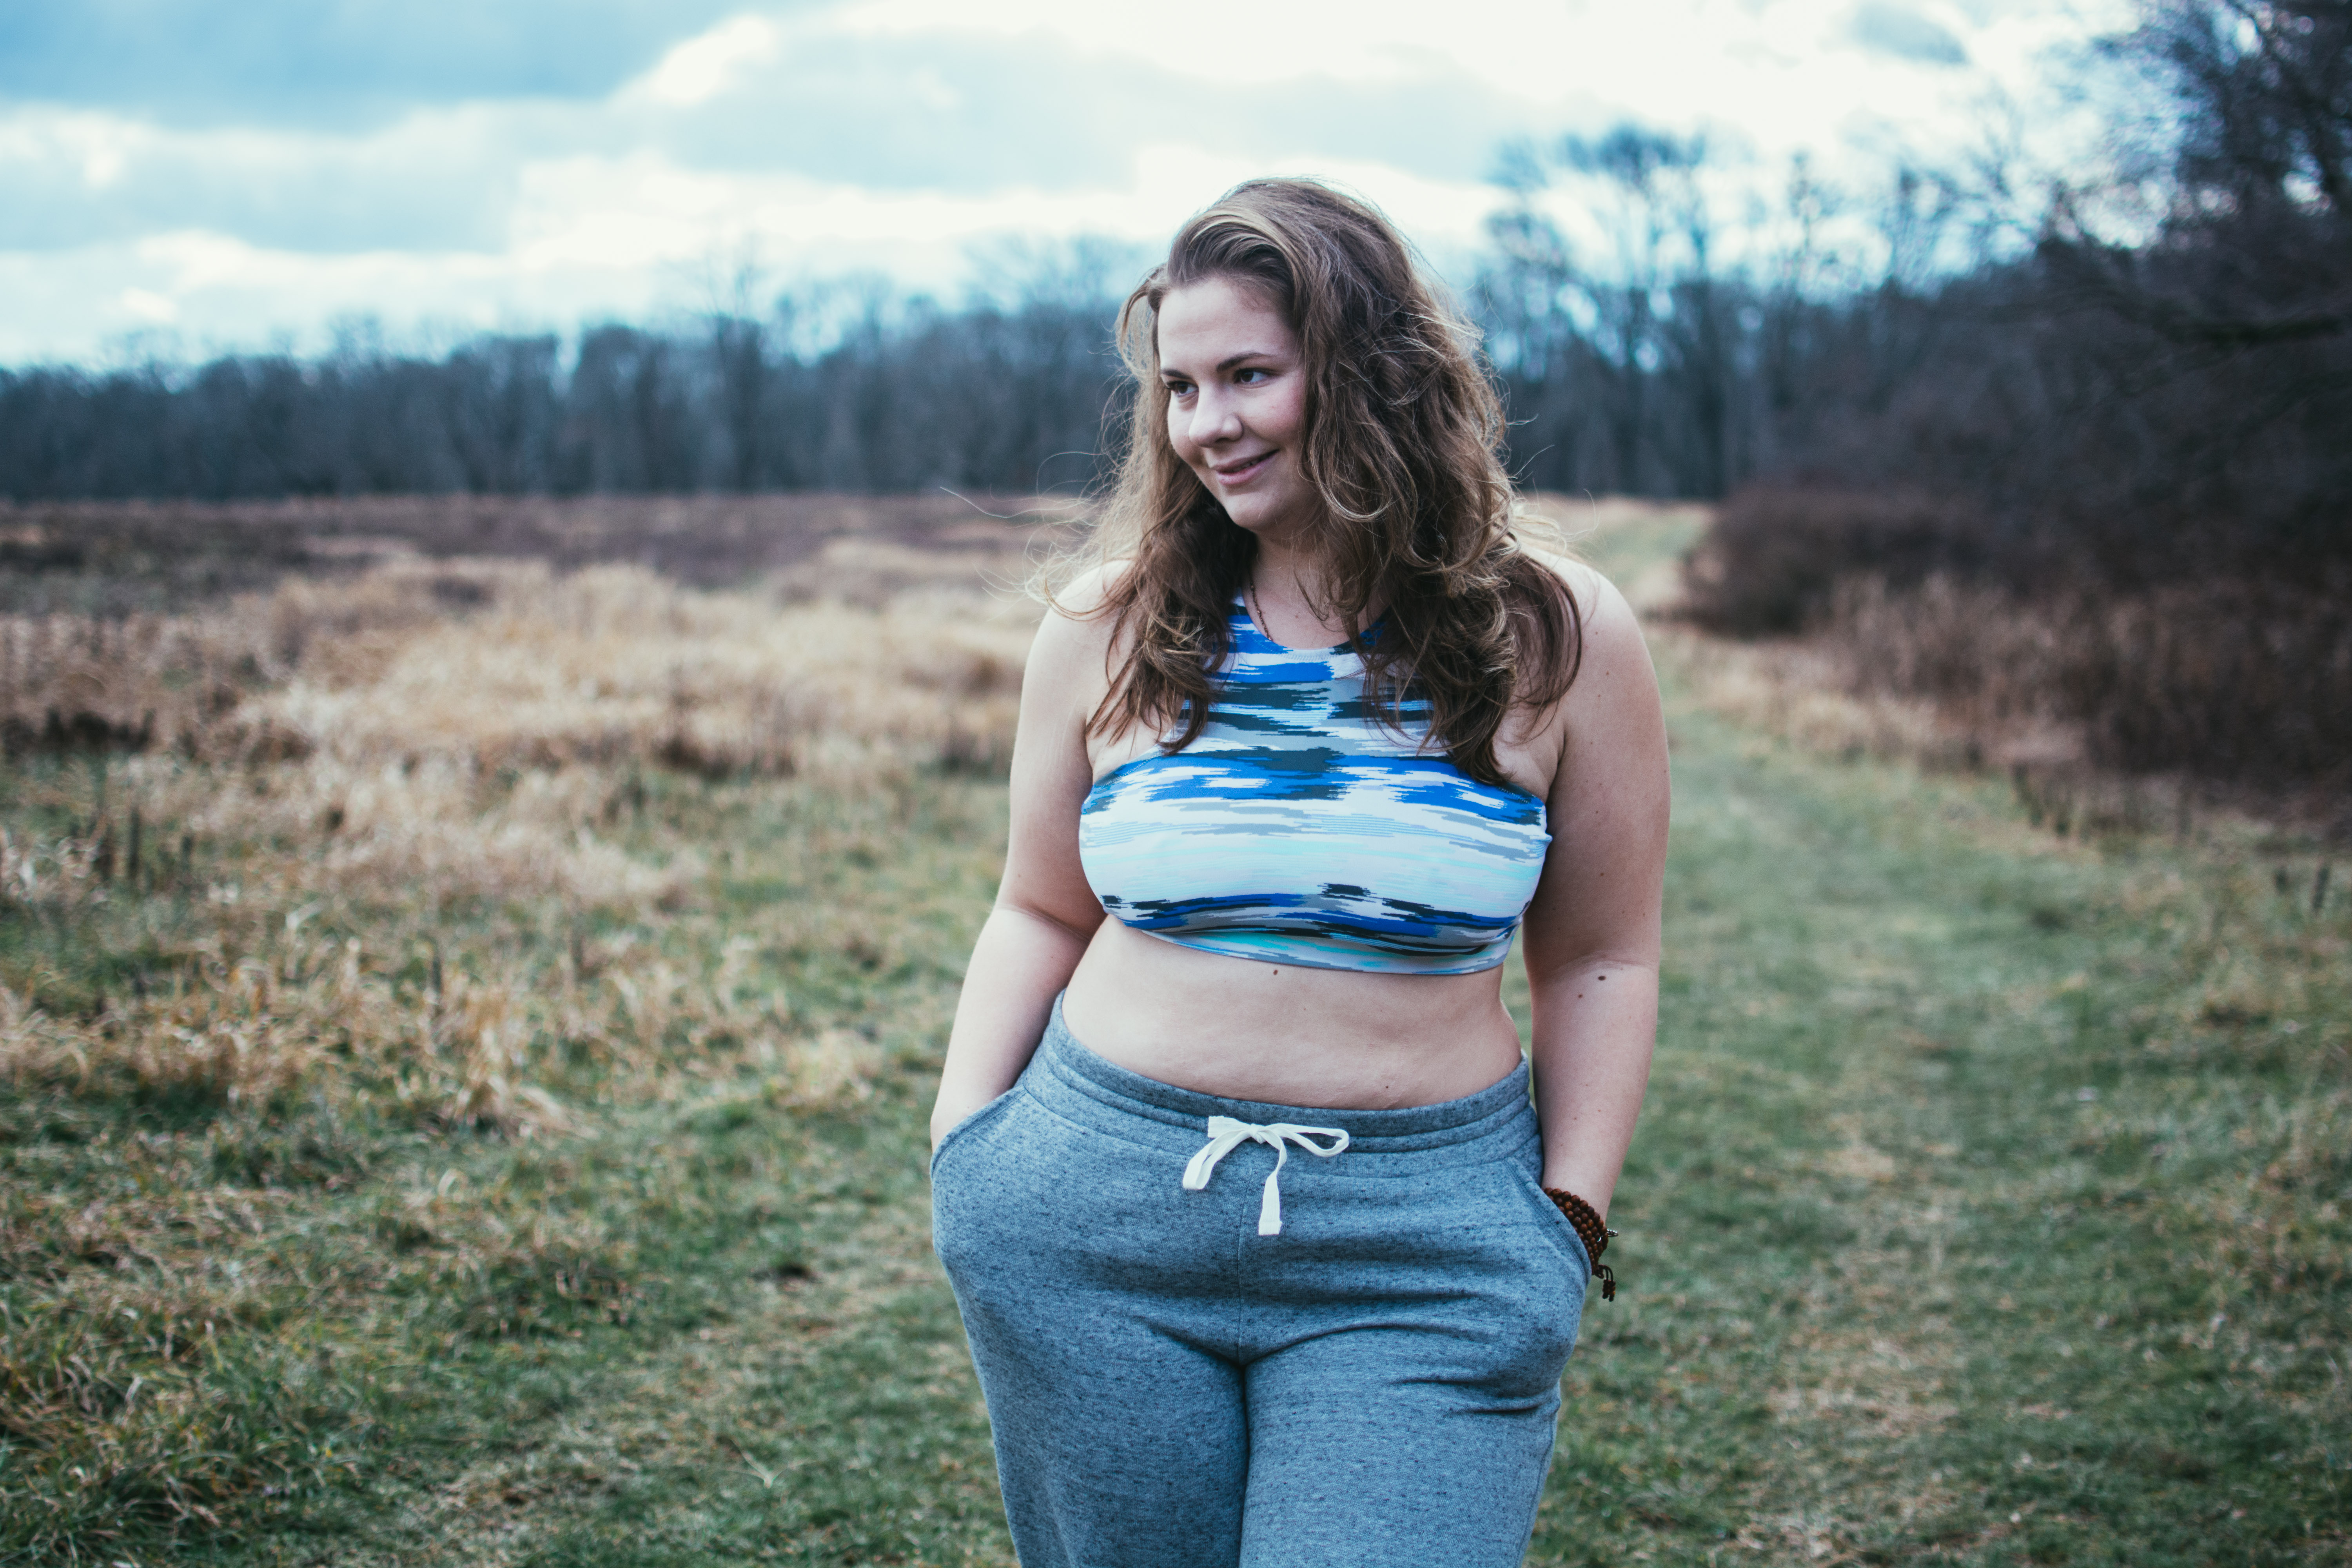 Dana Falsetti on yoga teacher training, never giving up, and being your own  best friend - Body Positive Yoga